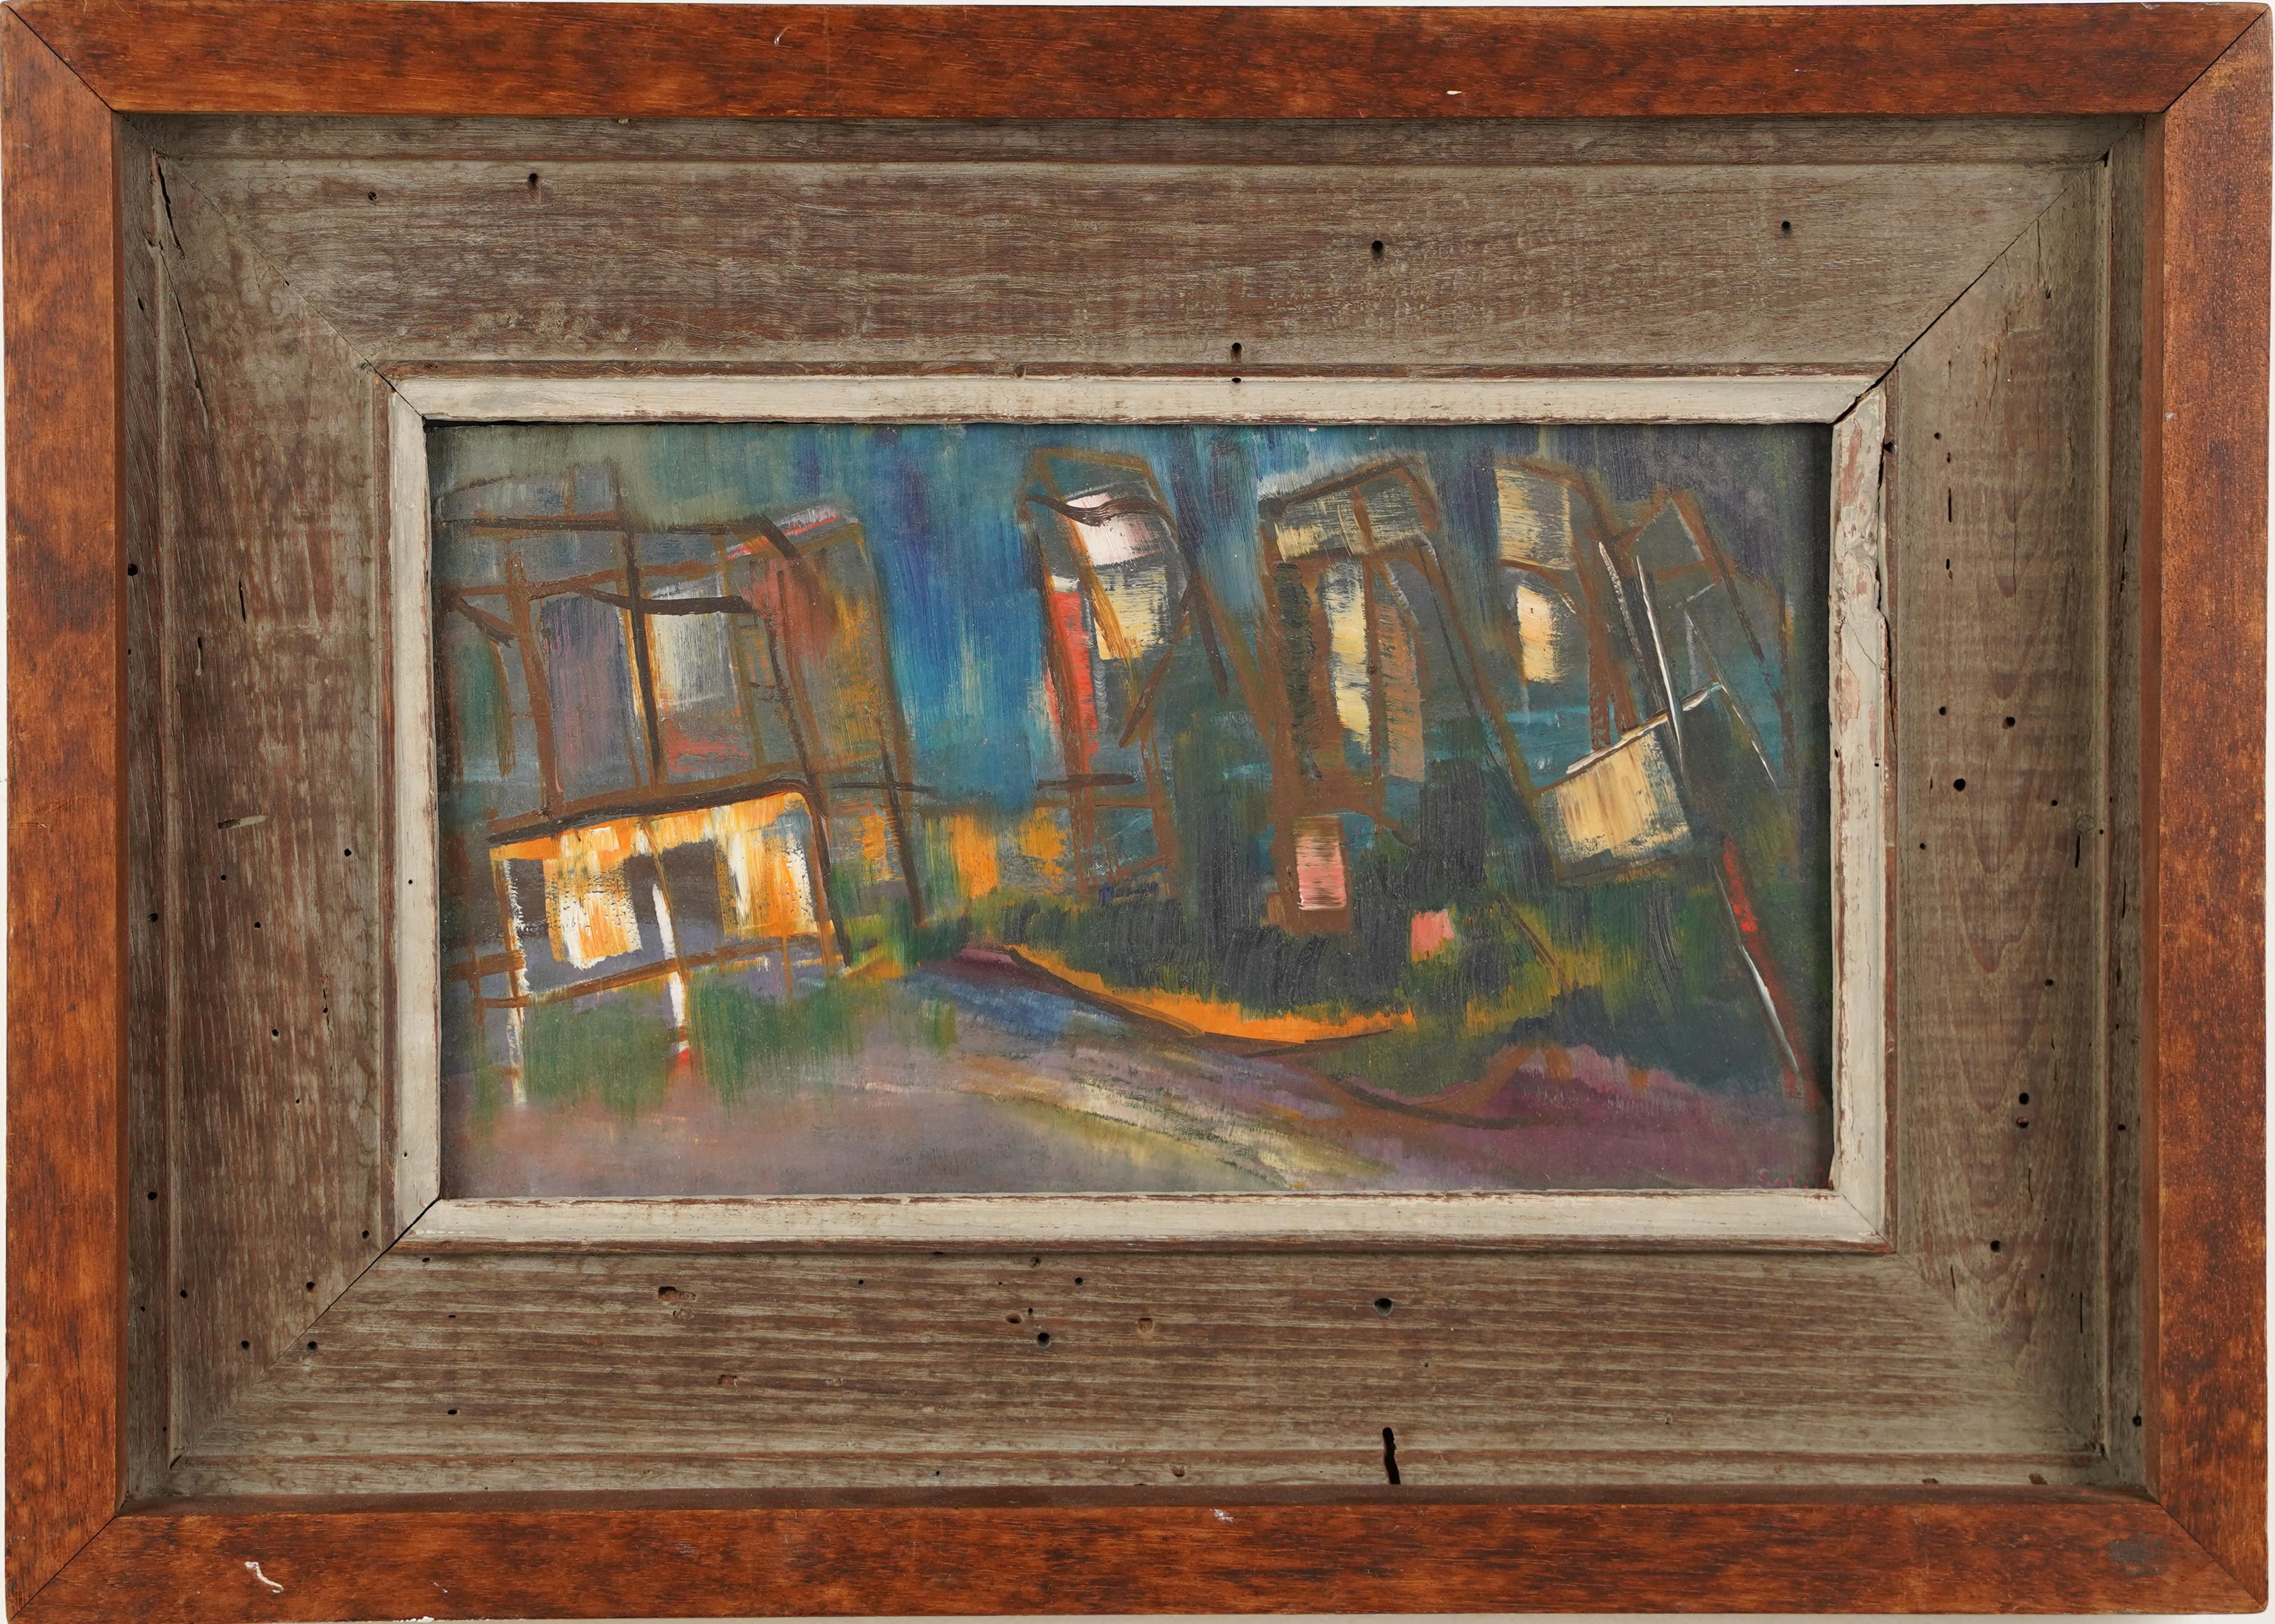  Antique American Architectural Rare Abstract Expressionist Mid Century Modern  - Painting by Unknown